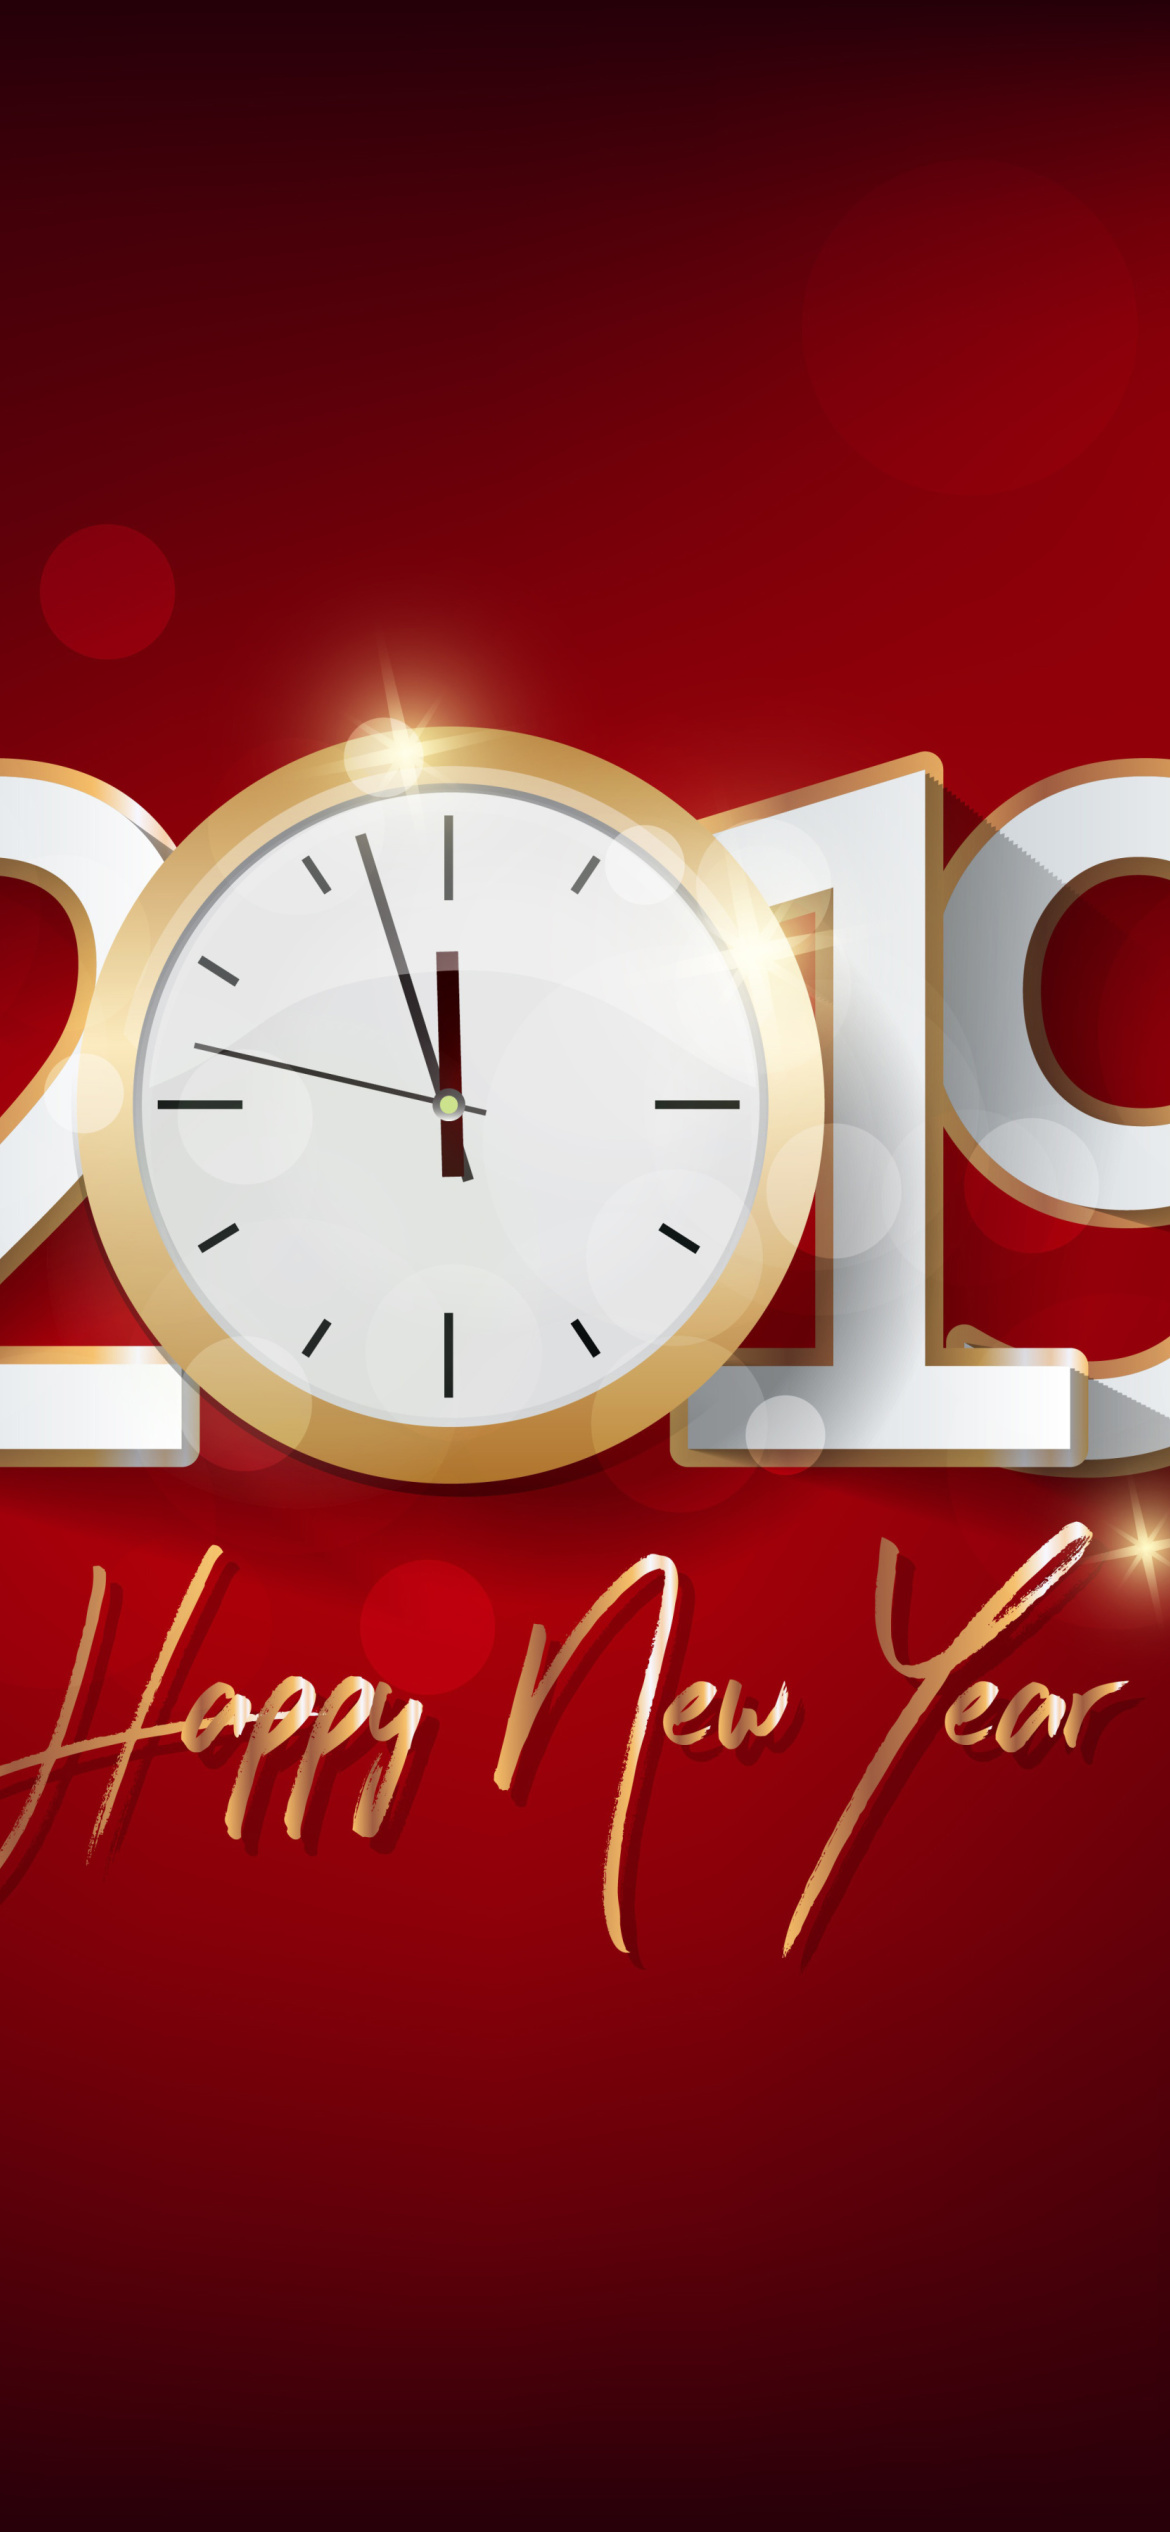 2019 New Year Festive Party wallpaper 1170x2532